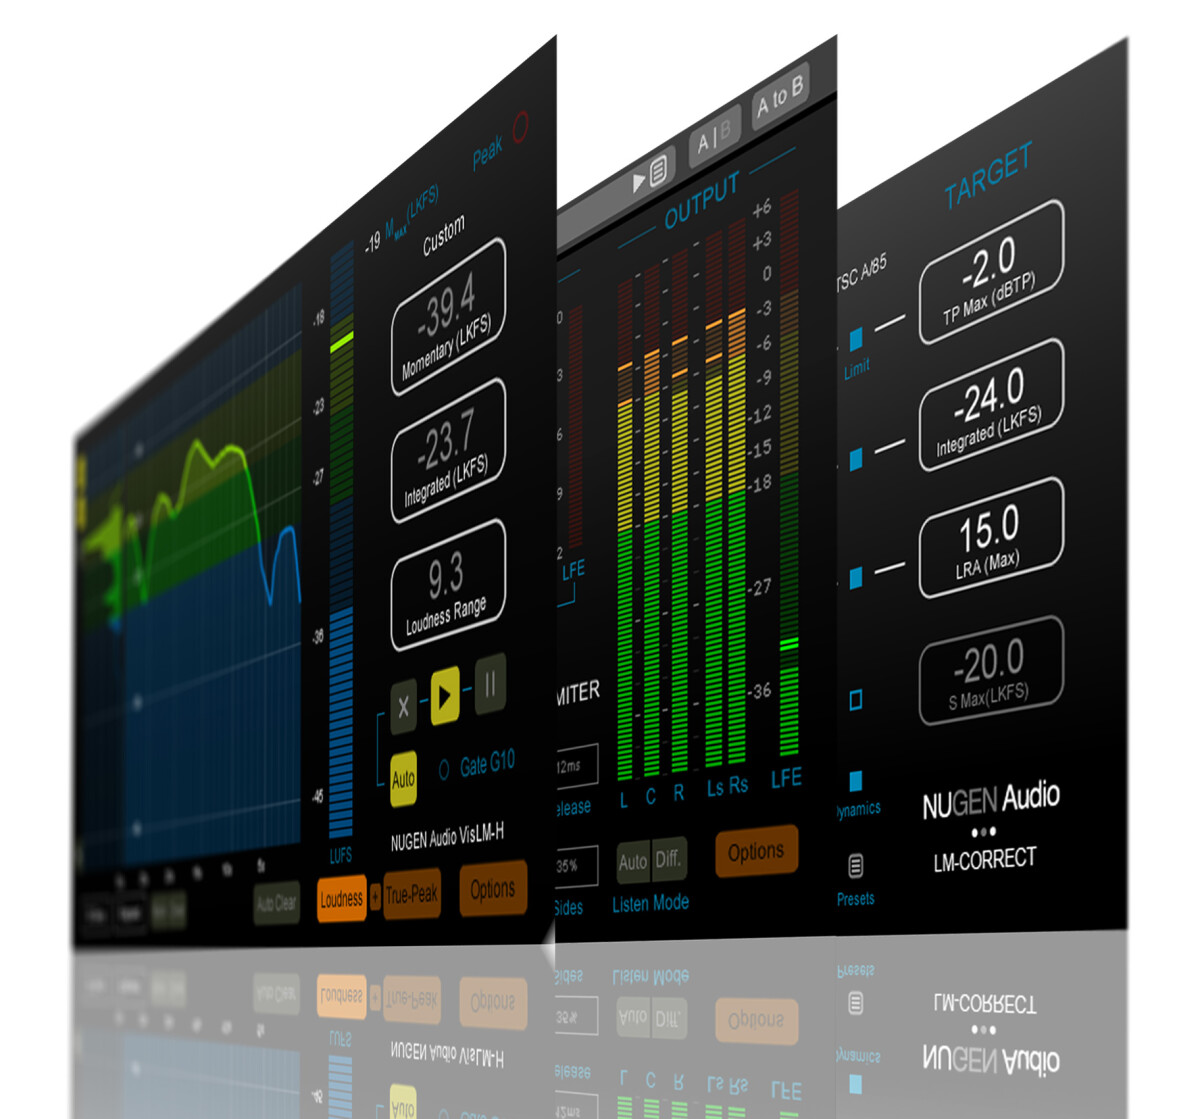 Nugen Audio updates Loudness Toolkit to v2